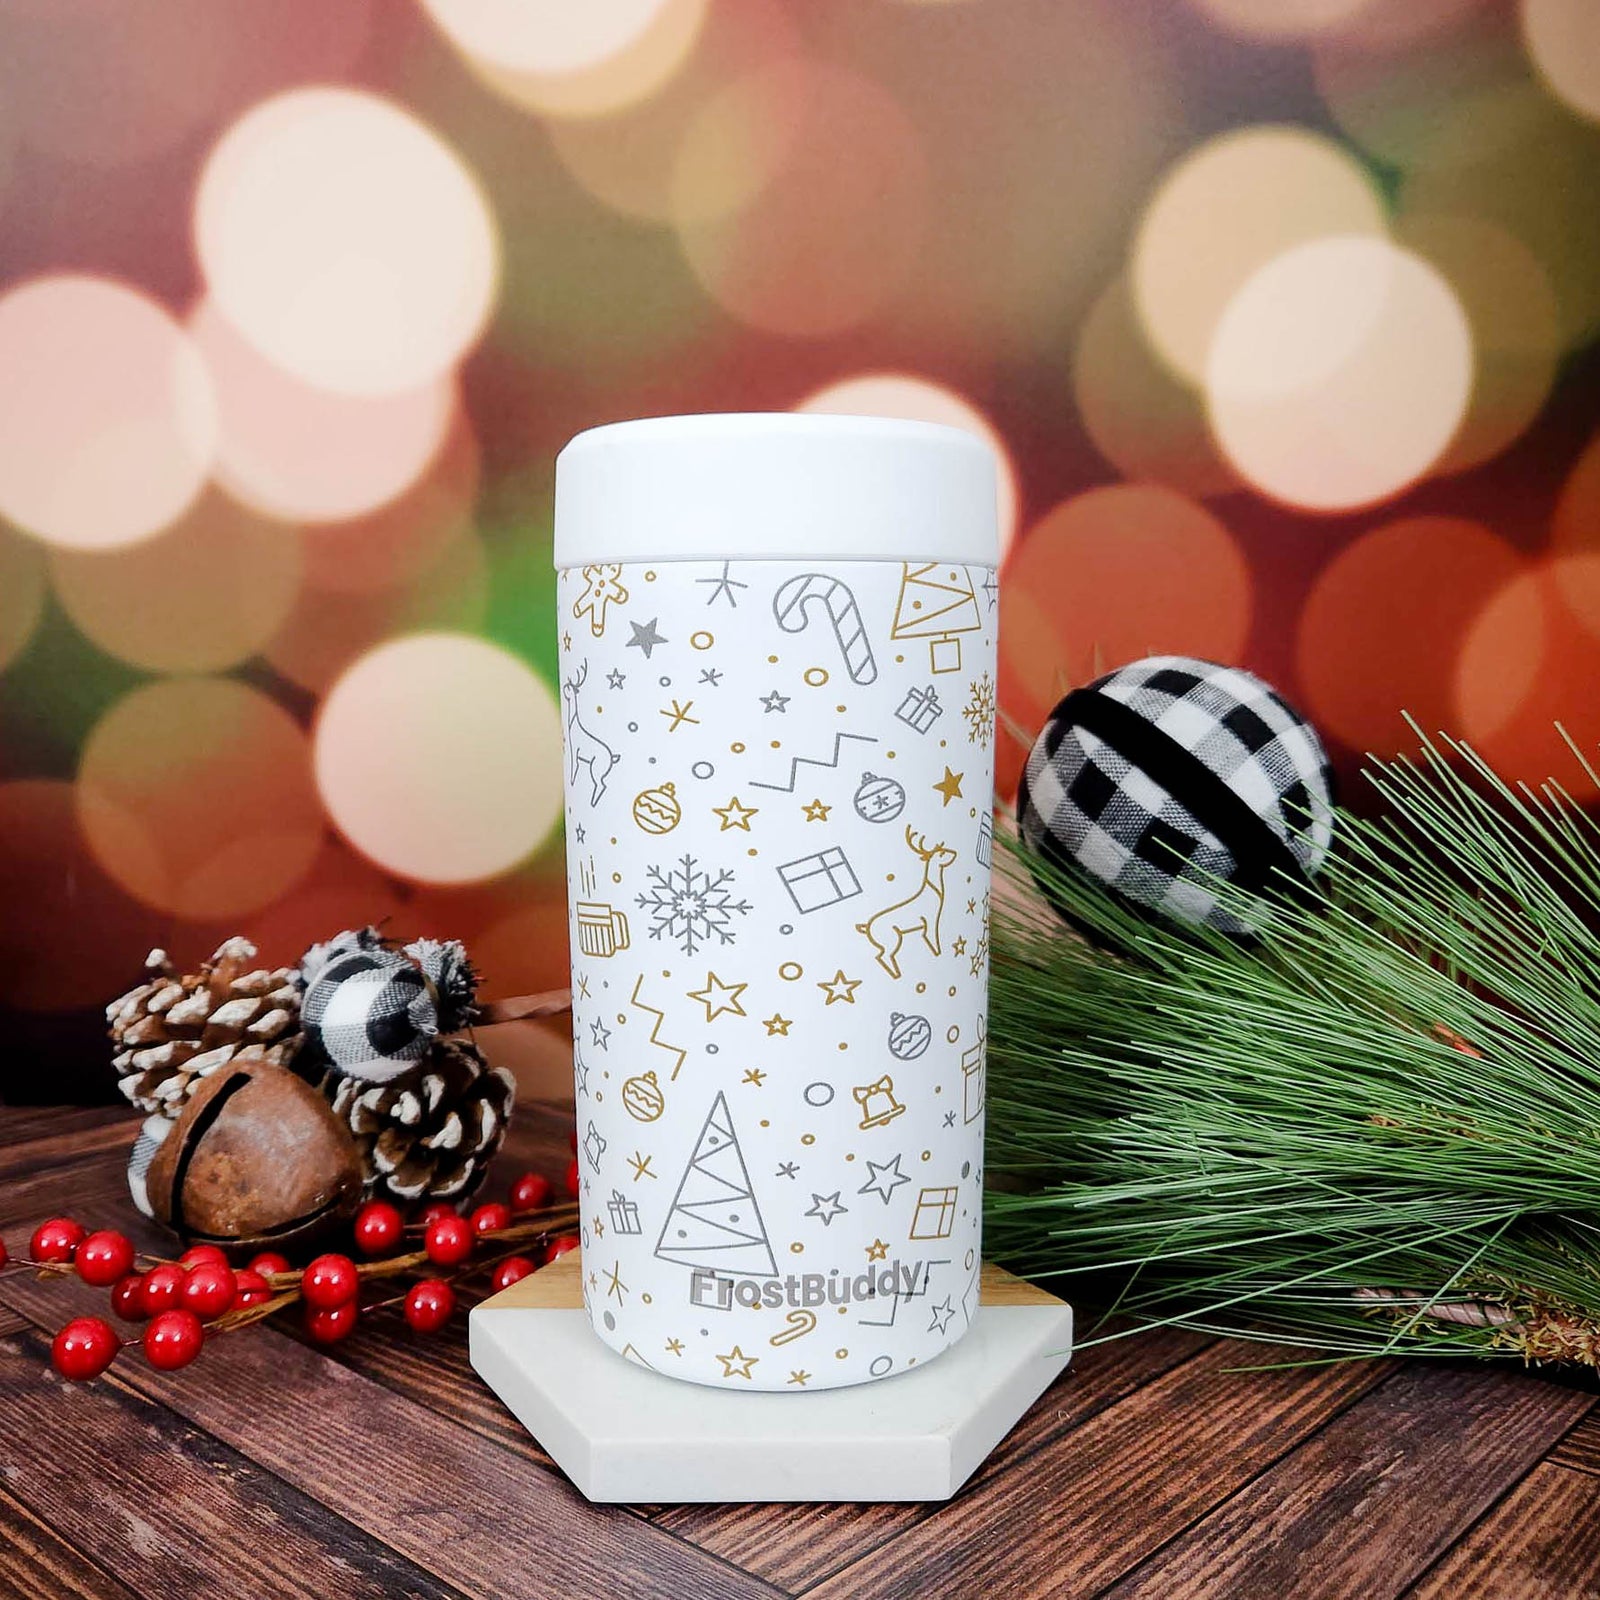 FROST BUDDY UNIVERSAL CAN COOLER – River Birch Gifts